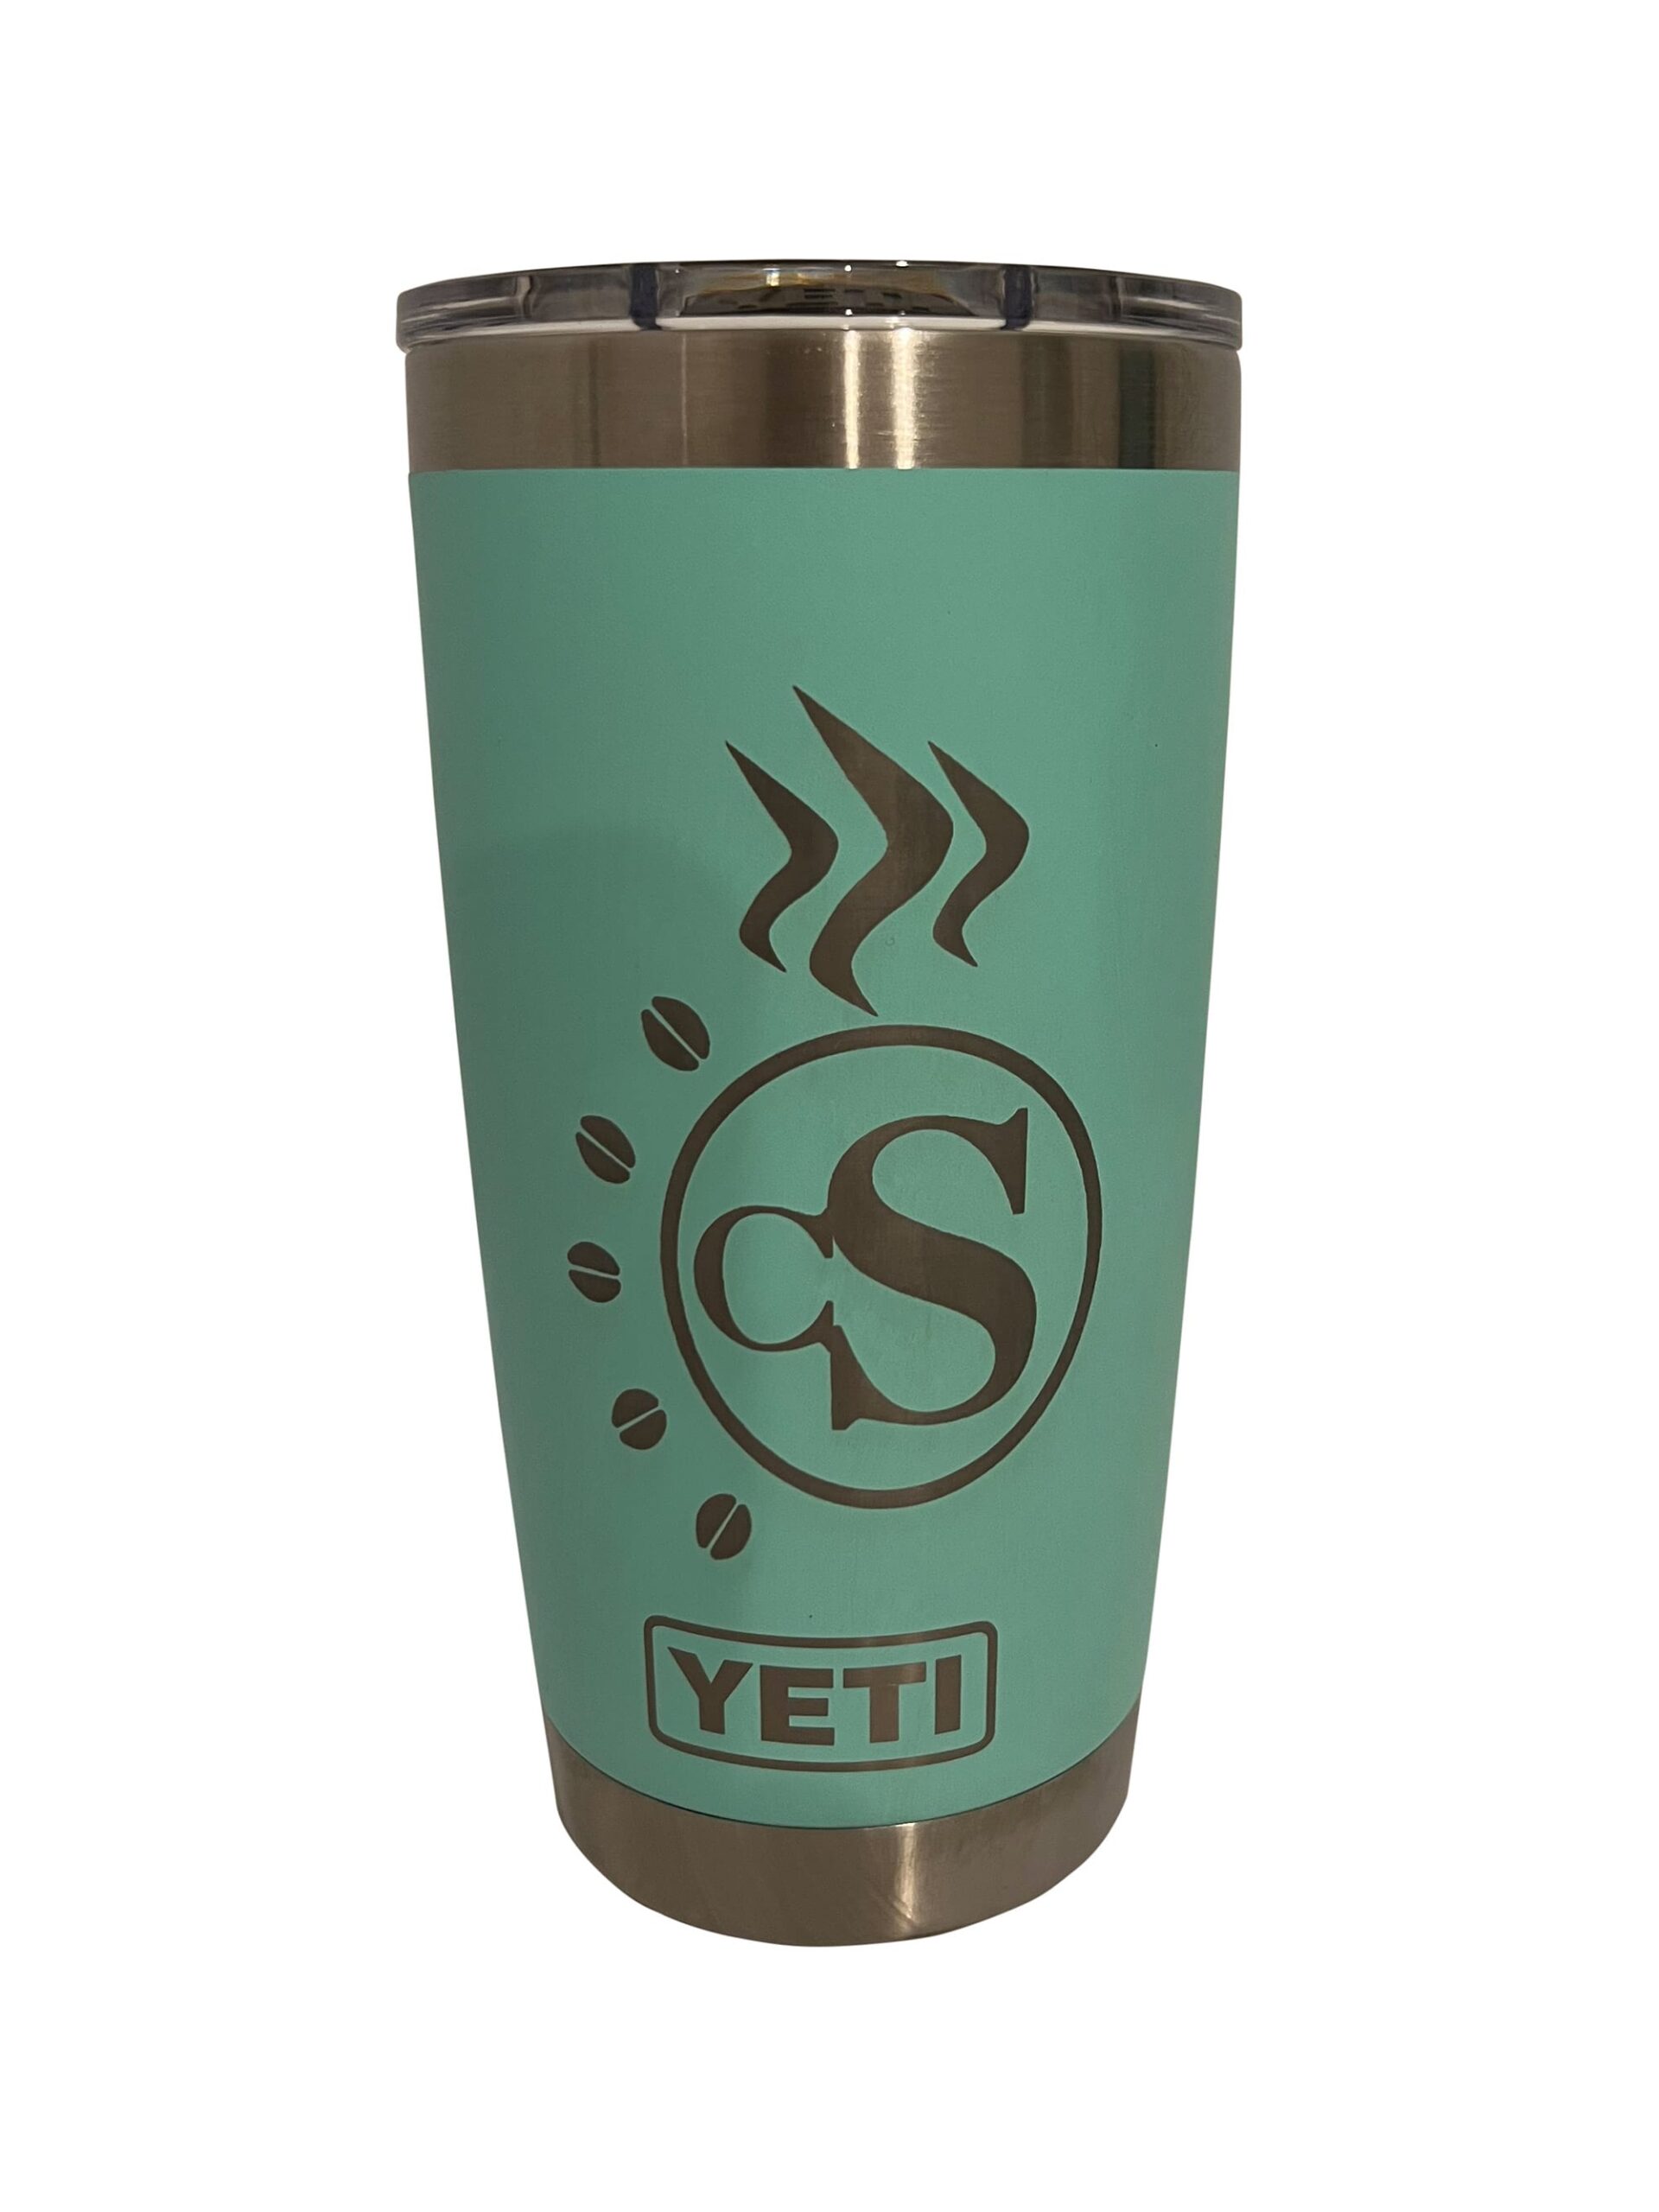 https://classynsassycoffee.com/wp-content/uploads/2020/09/teal-yeti-front-min-scaled.jpg